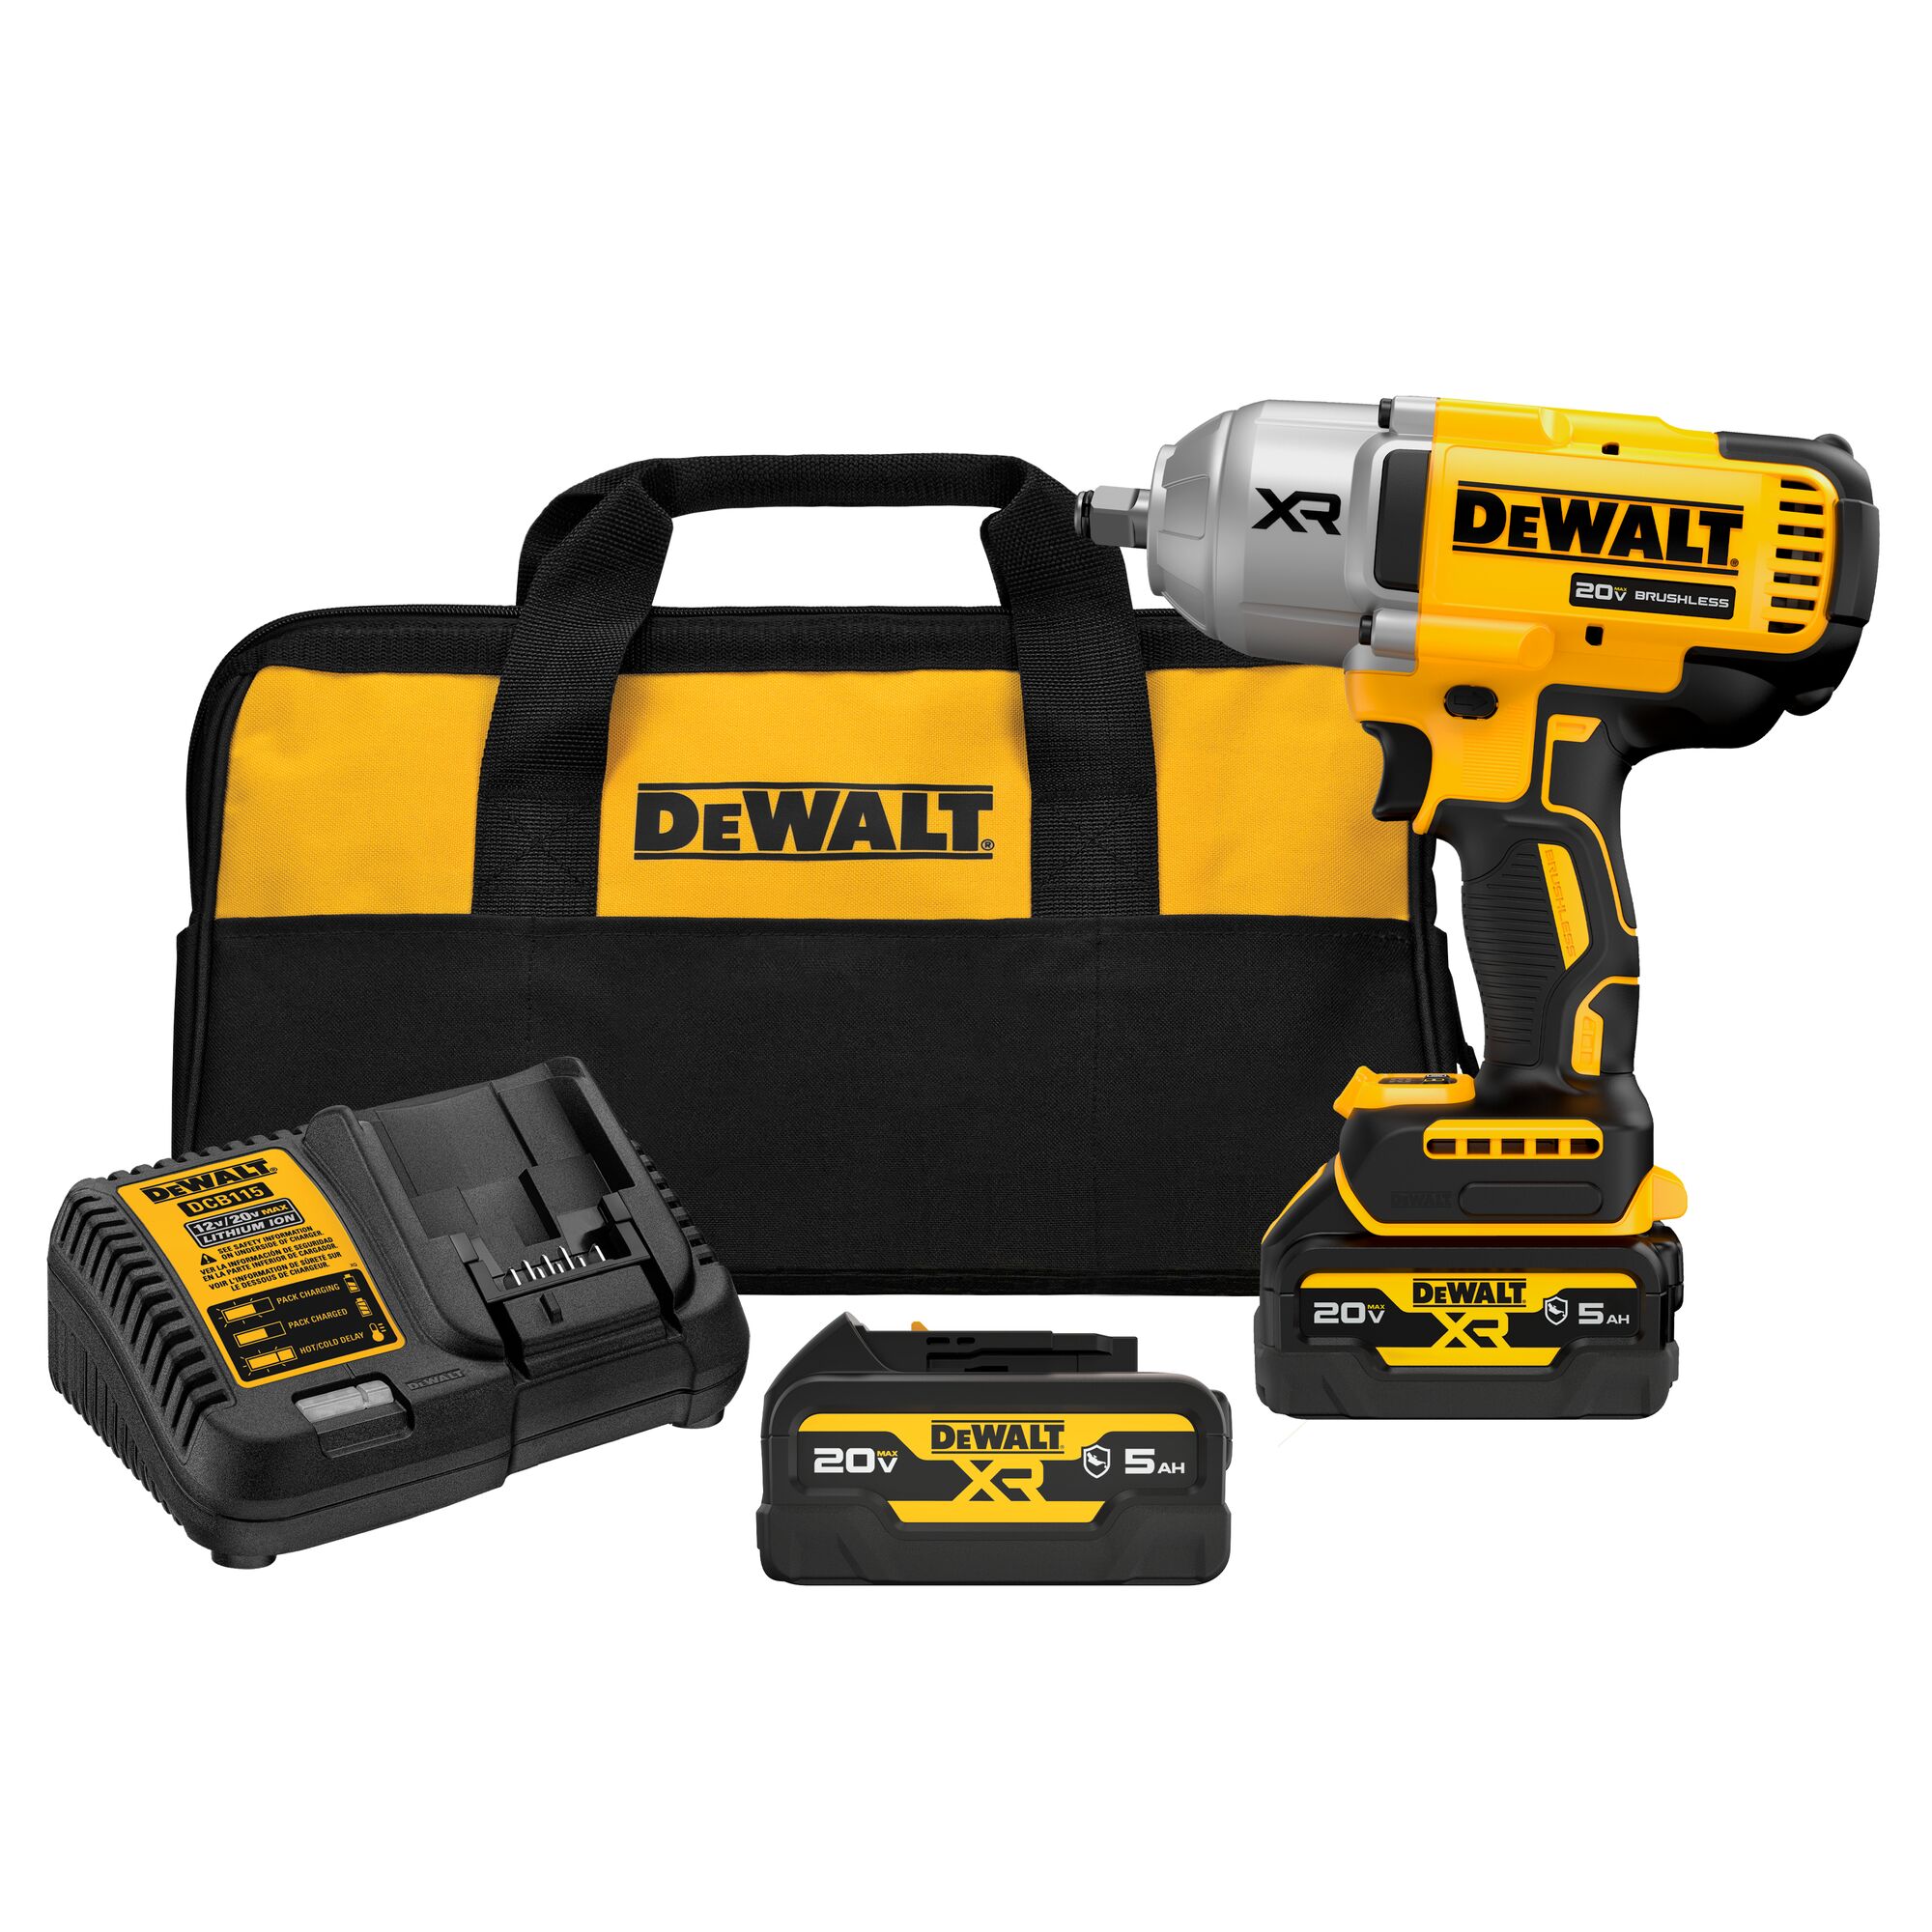 DeWALT DCF899P1 18V Brushless Impact Wrench with 1 x 5Ah Battery & Charger in TStak 